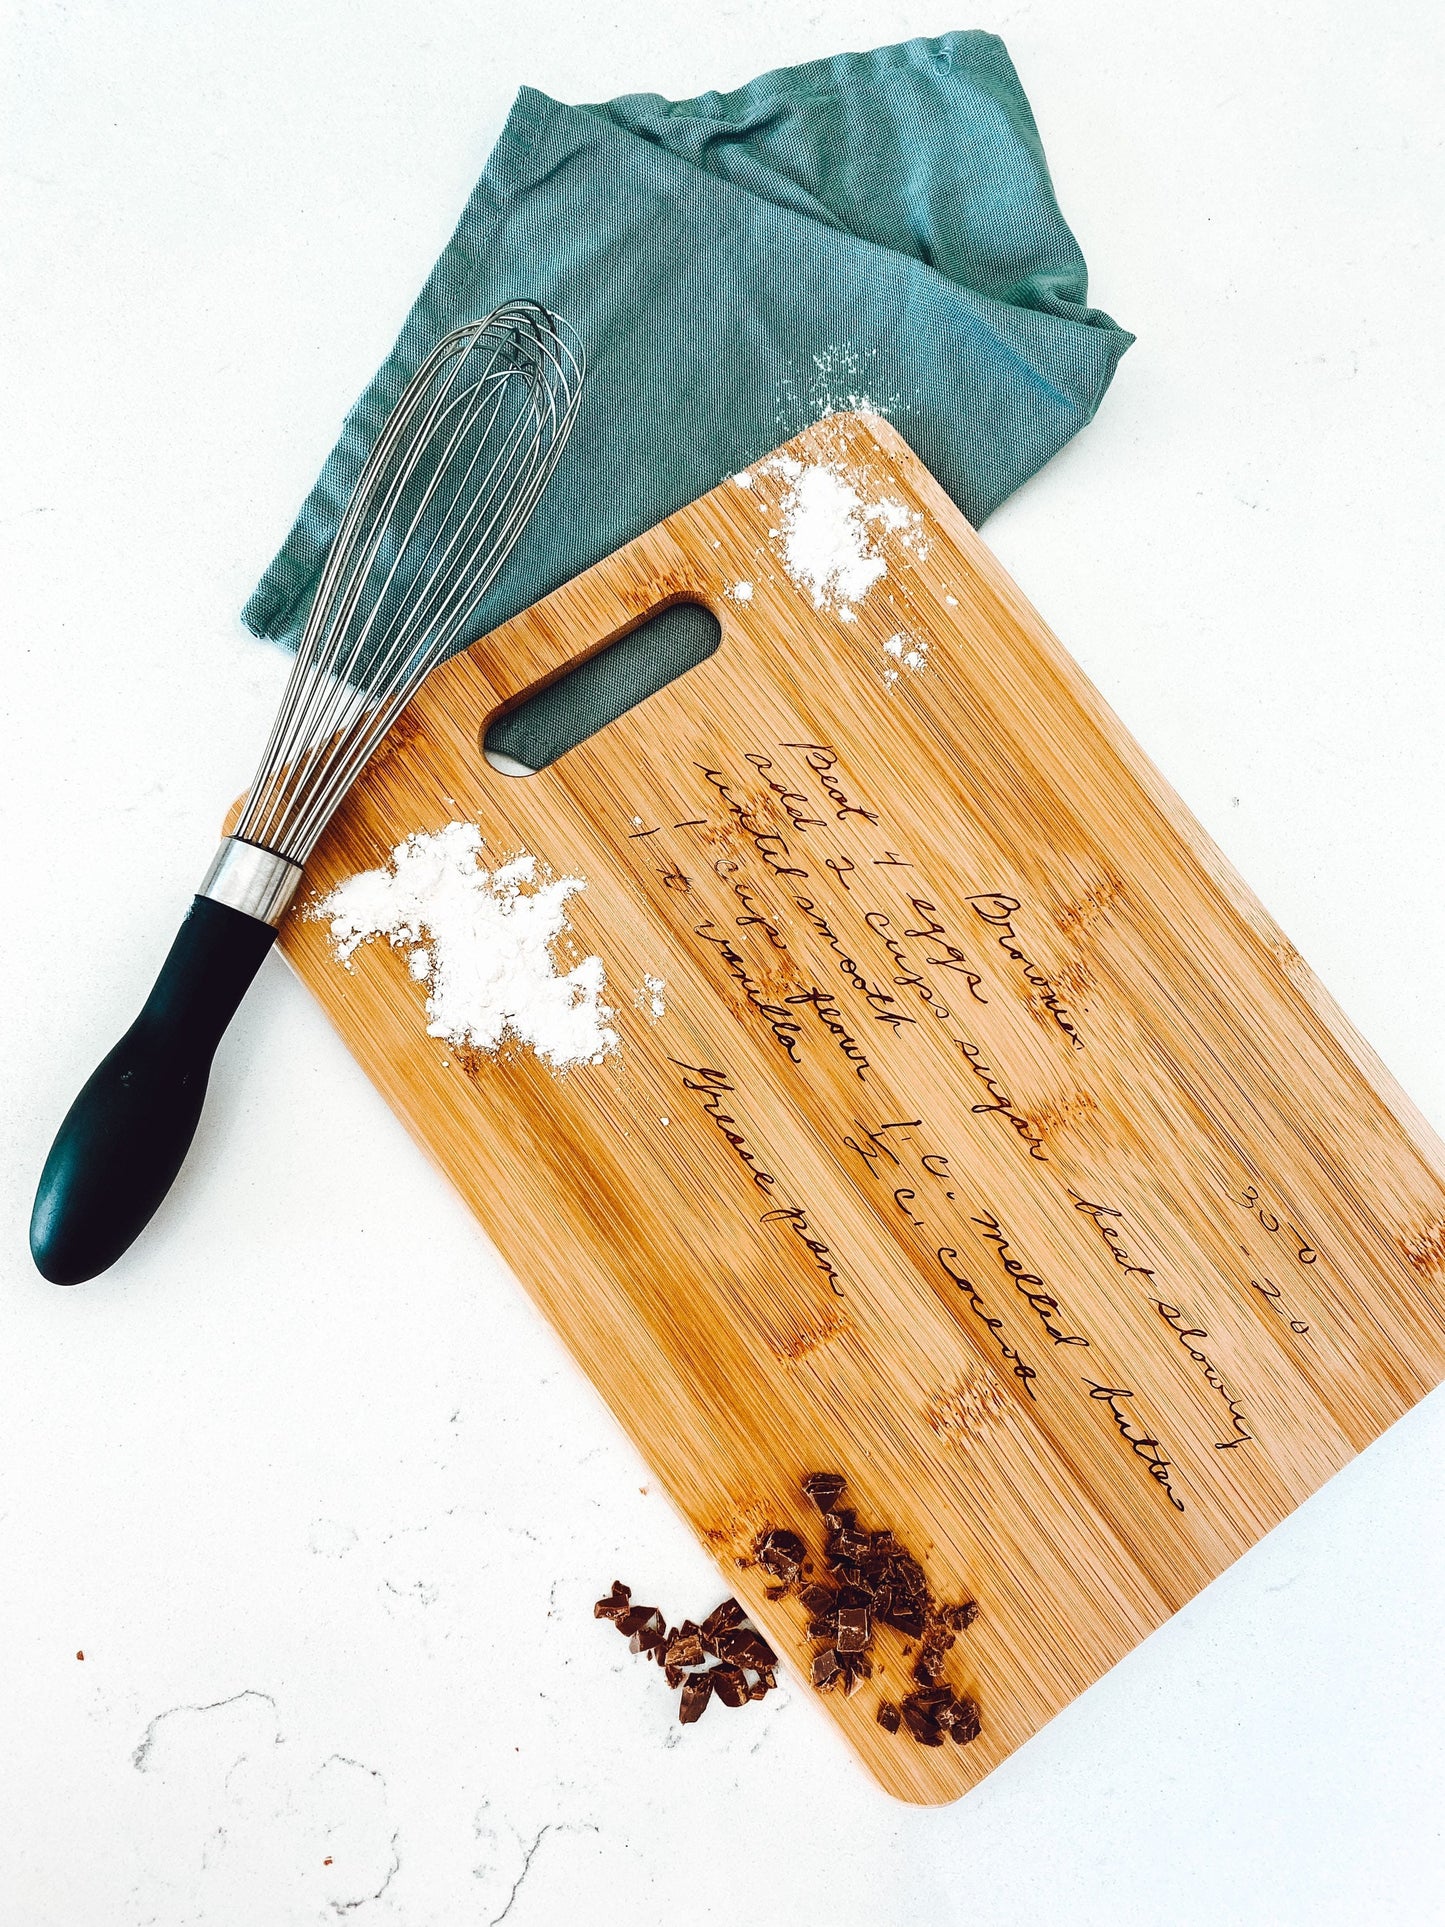 Recipe Cutting Board Engraved, Customized Cutting Board Recipe, Handwritten Recipe Cutting Board Handwriting Gift, Christmas Gift for Her